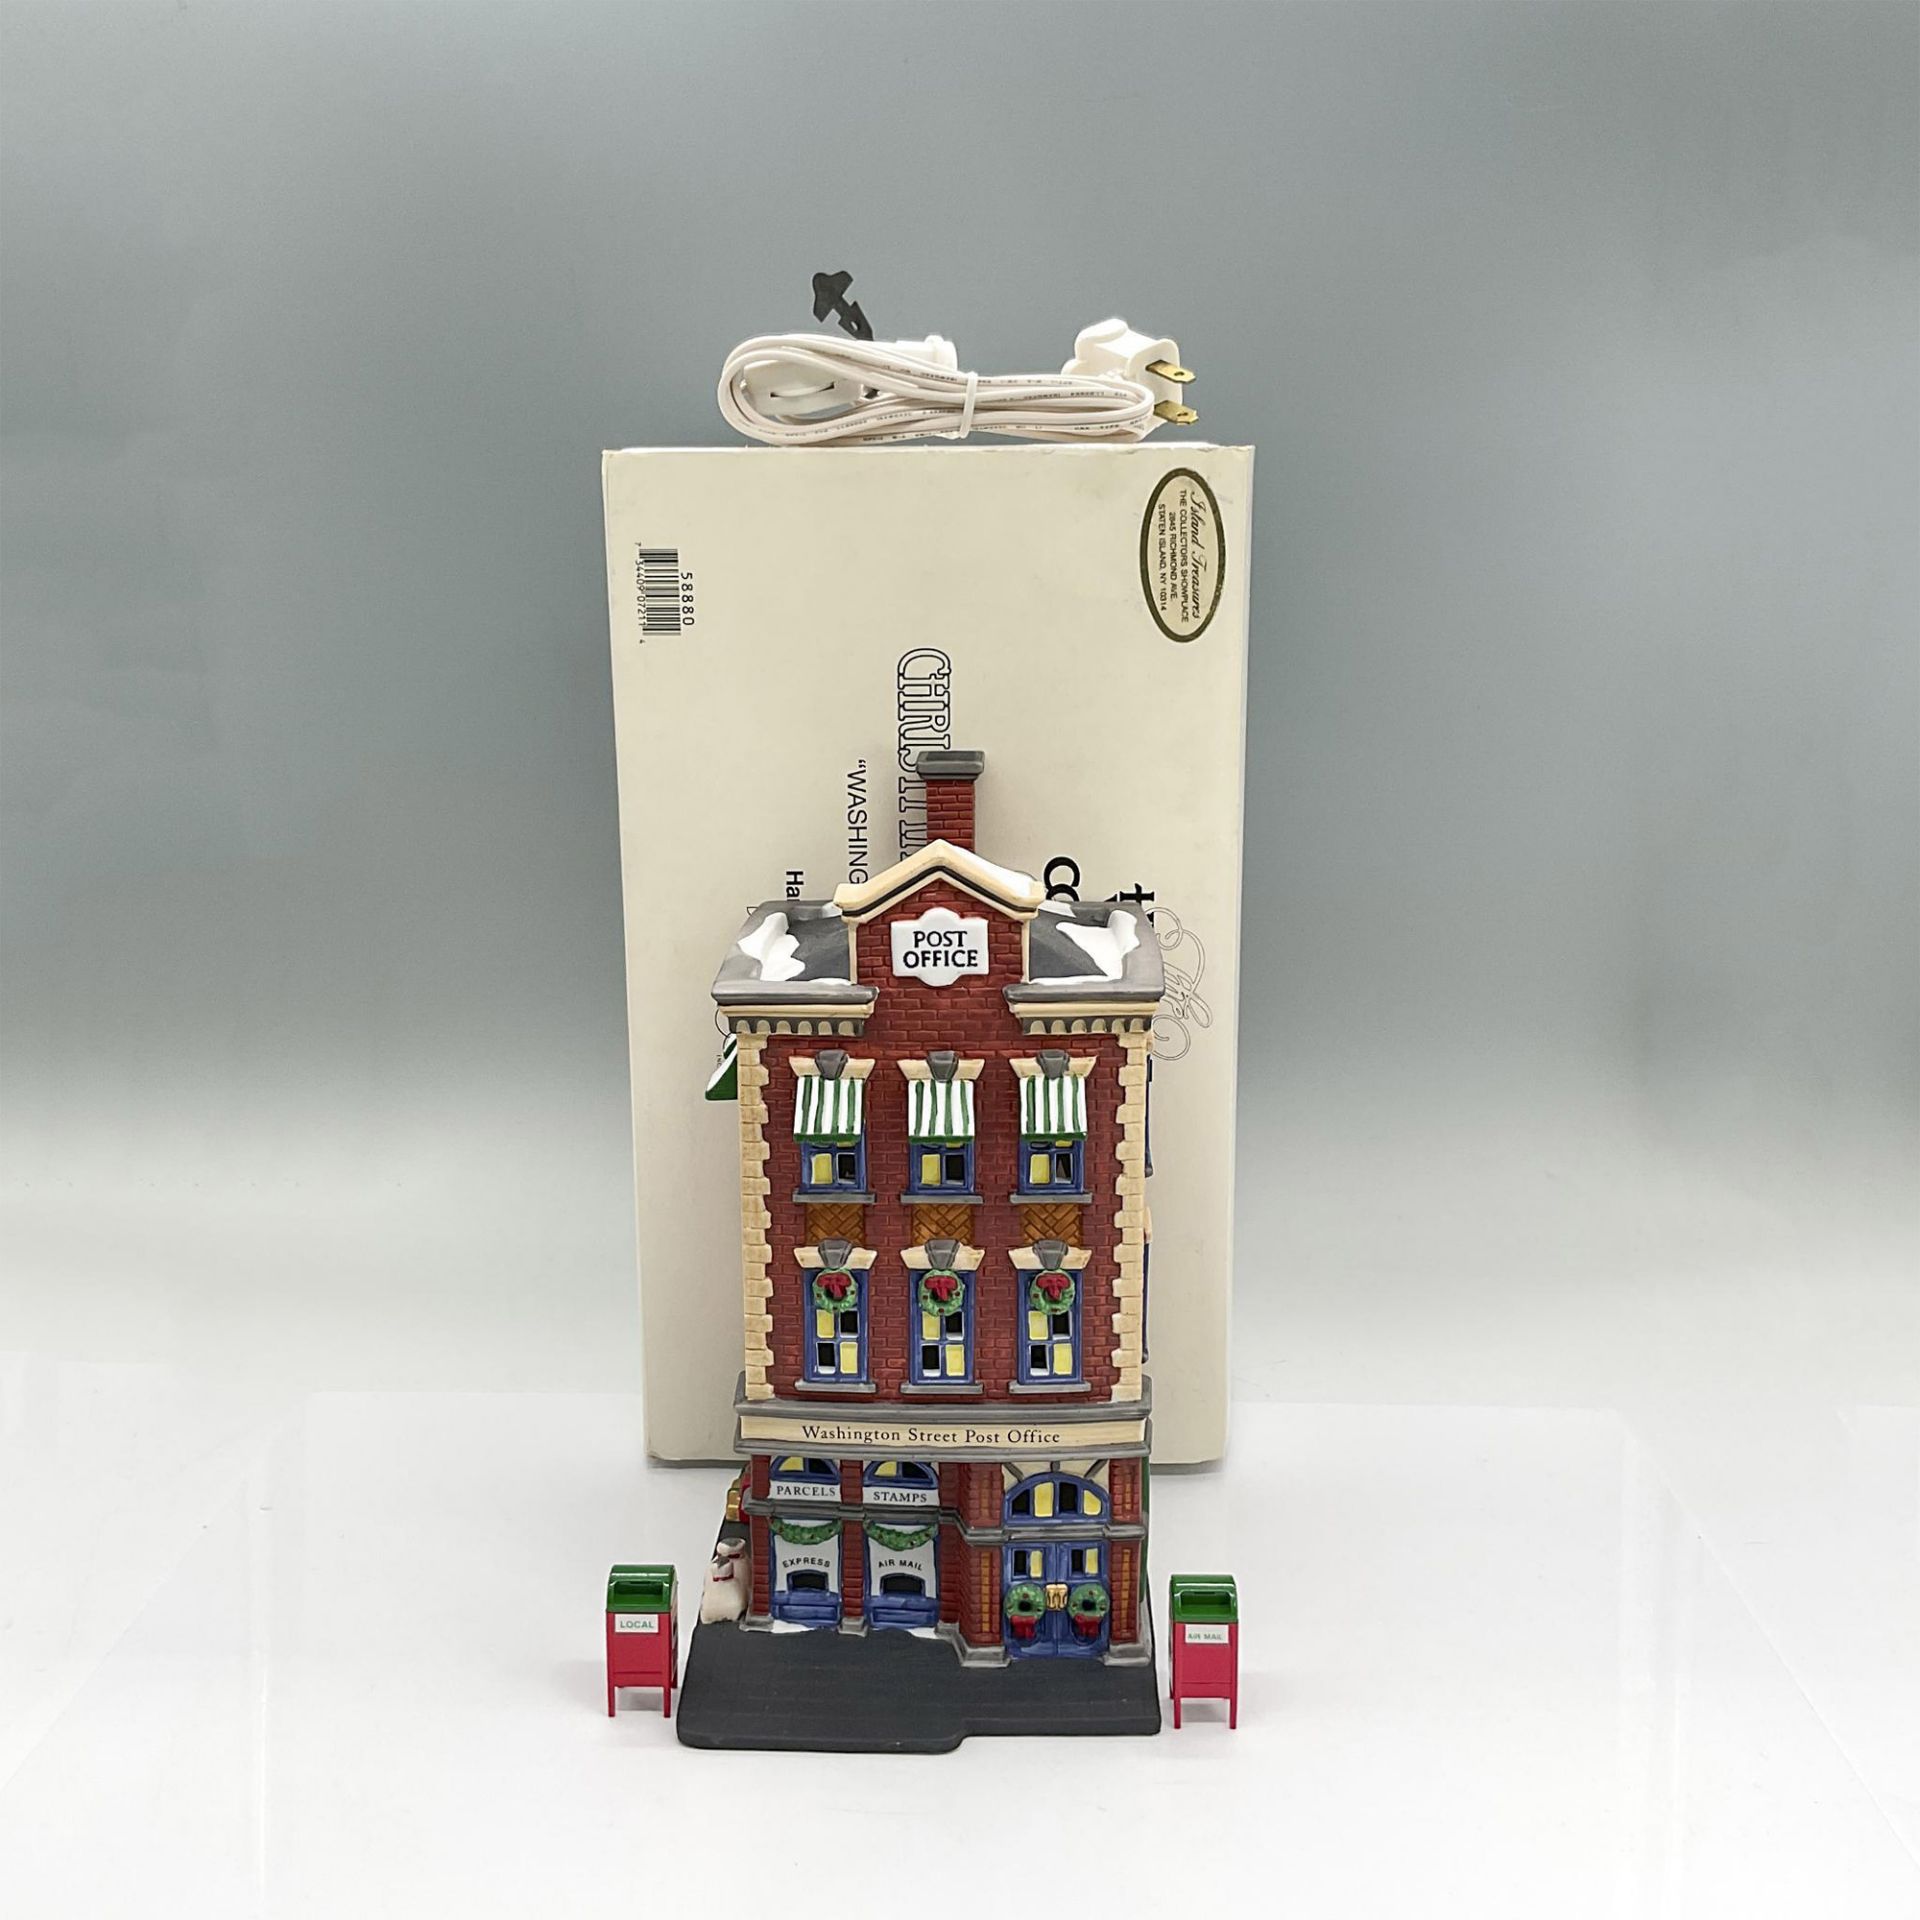 Department 56 Heritage Village Collection Building, Post Office - Image 6 of 6